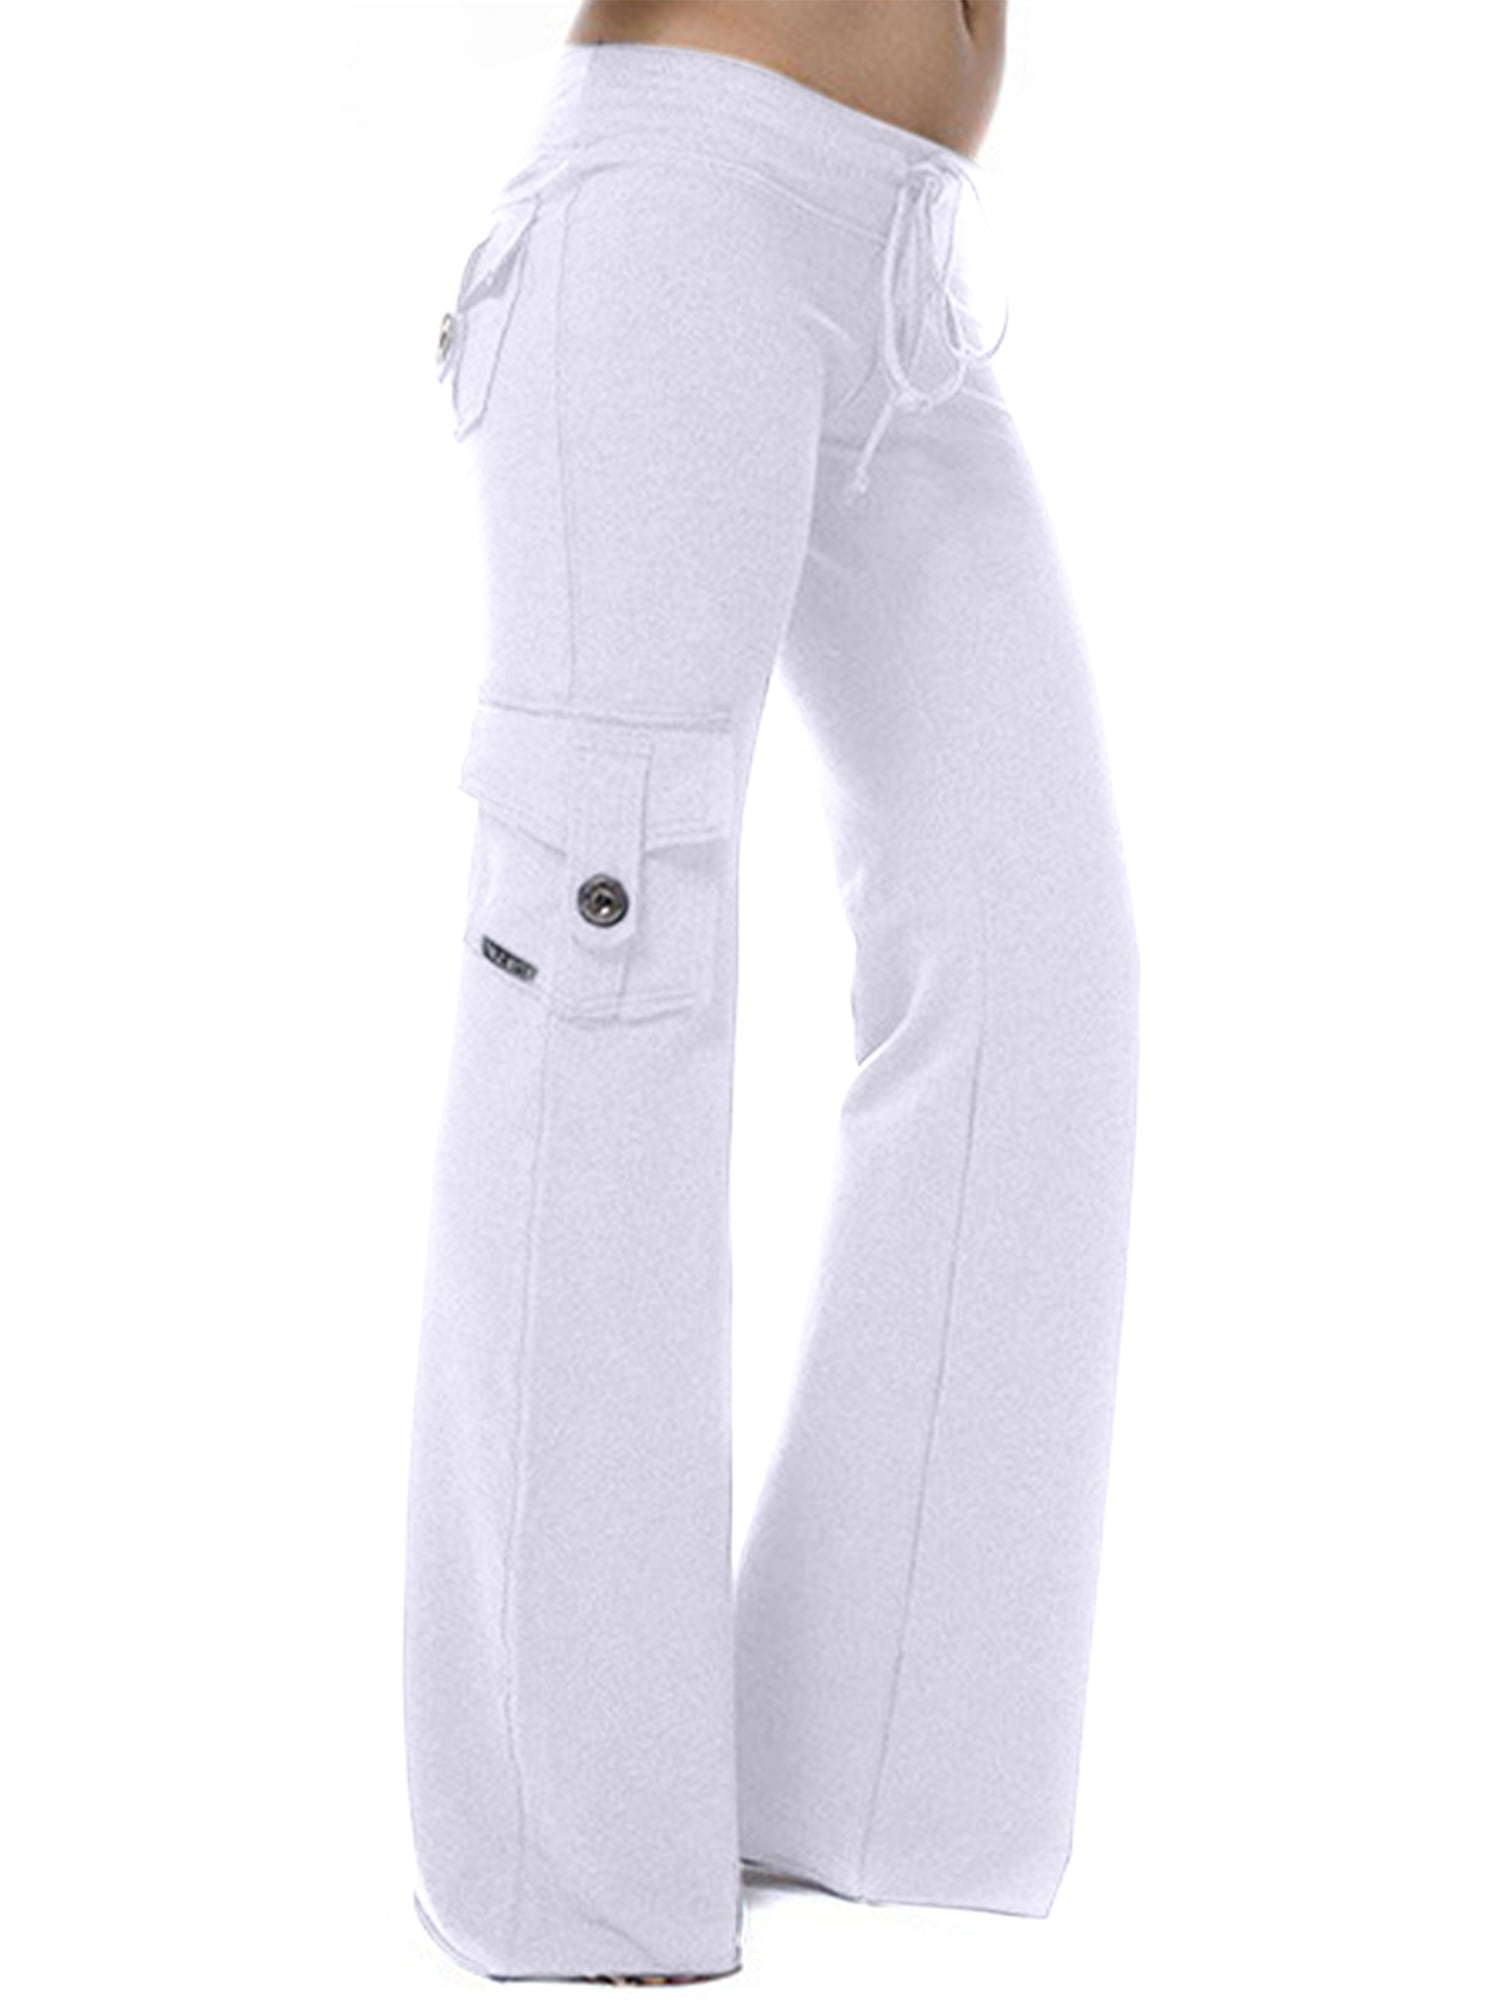 LISM Plus Size Sweat Pants for Women Ladies with Pockets S-4XL